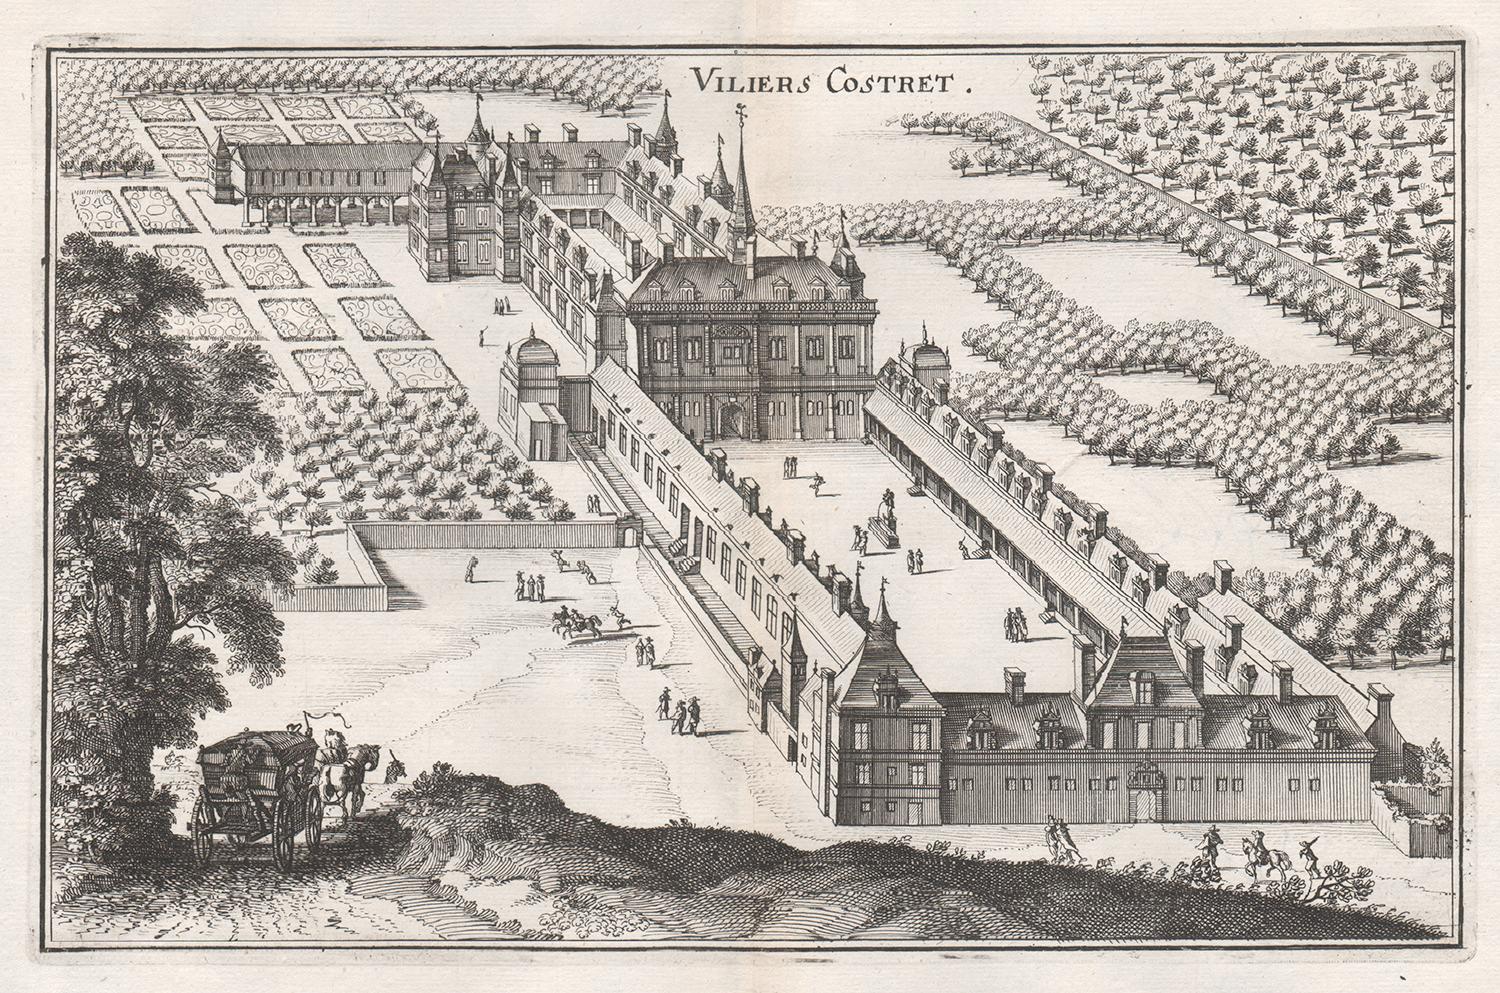 Matthaeus Merian Landscape Print - Viliers Costret, French chateau, architectural plan, mid 17th century engraving